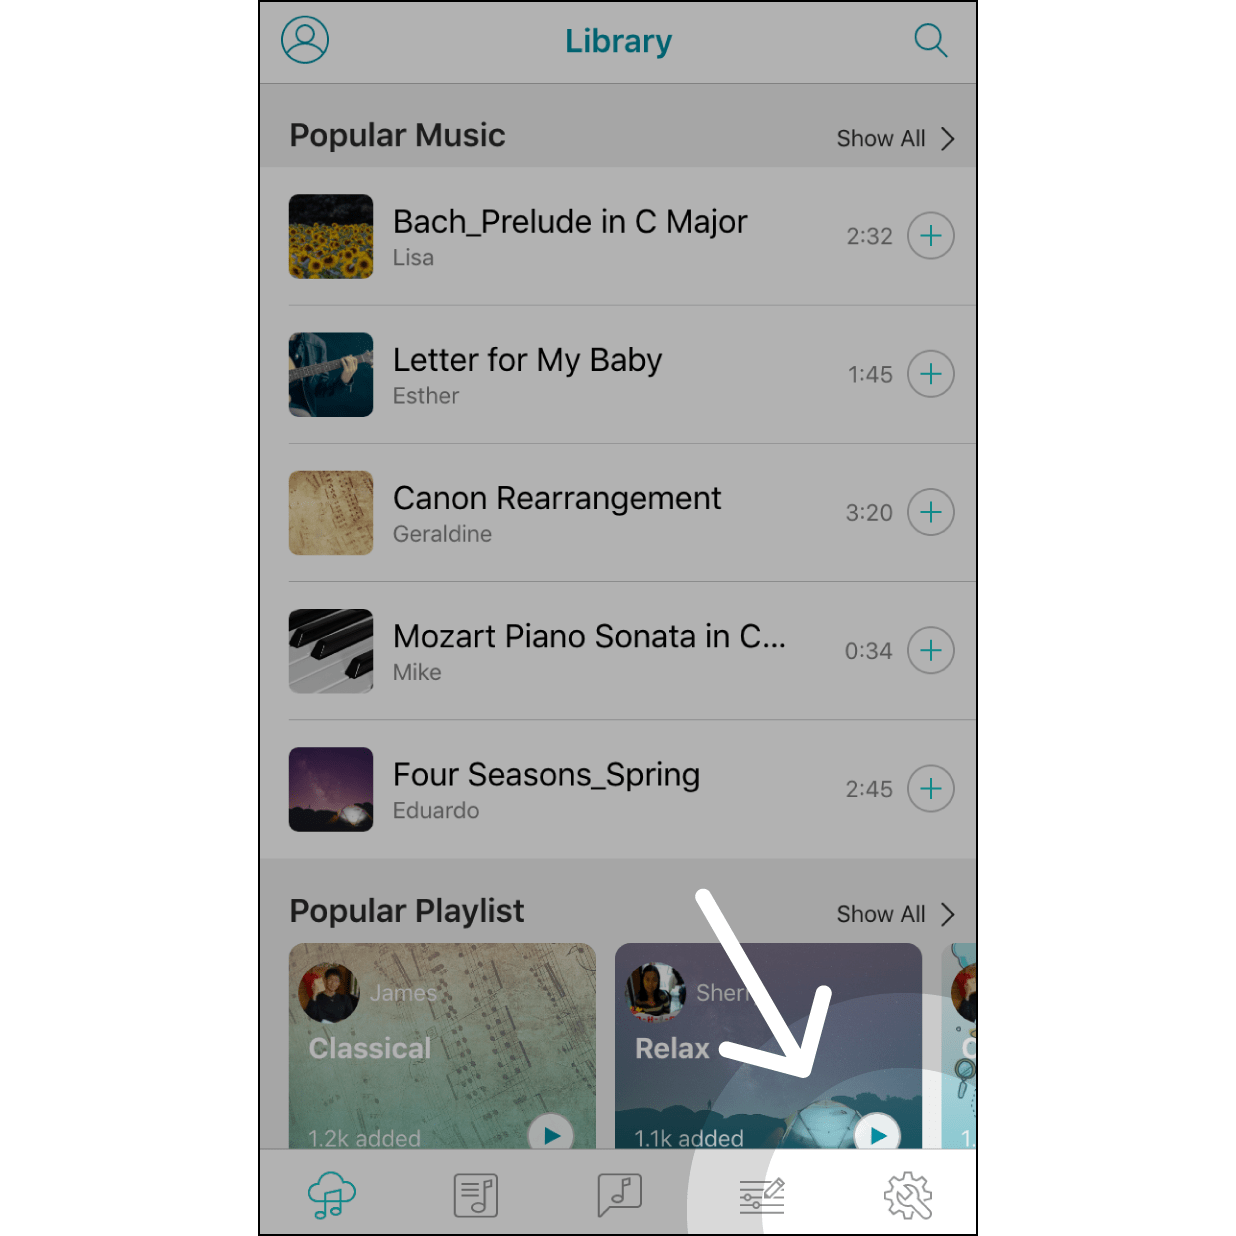 1. Enter the Setting page in the App. Click on the gear icon to enter the setting.